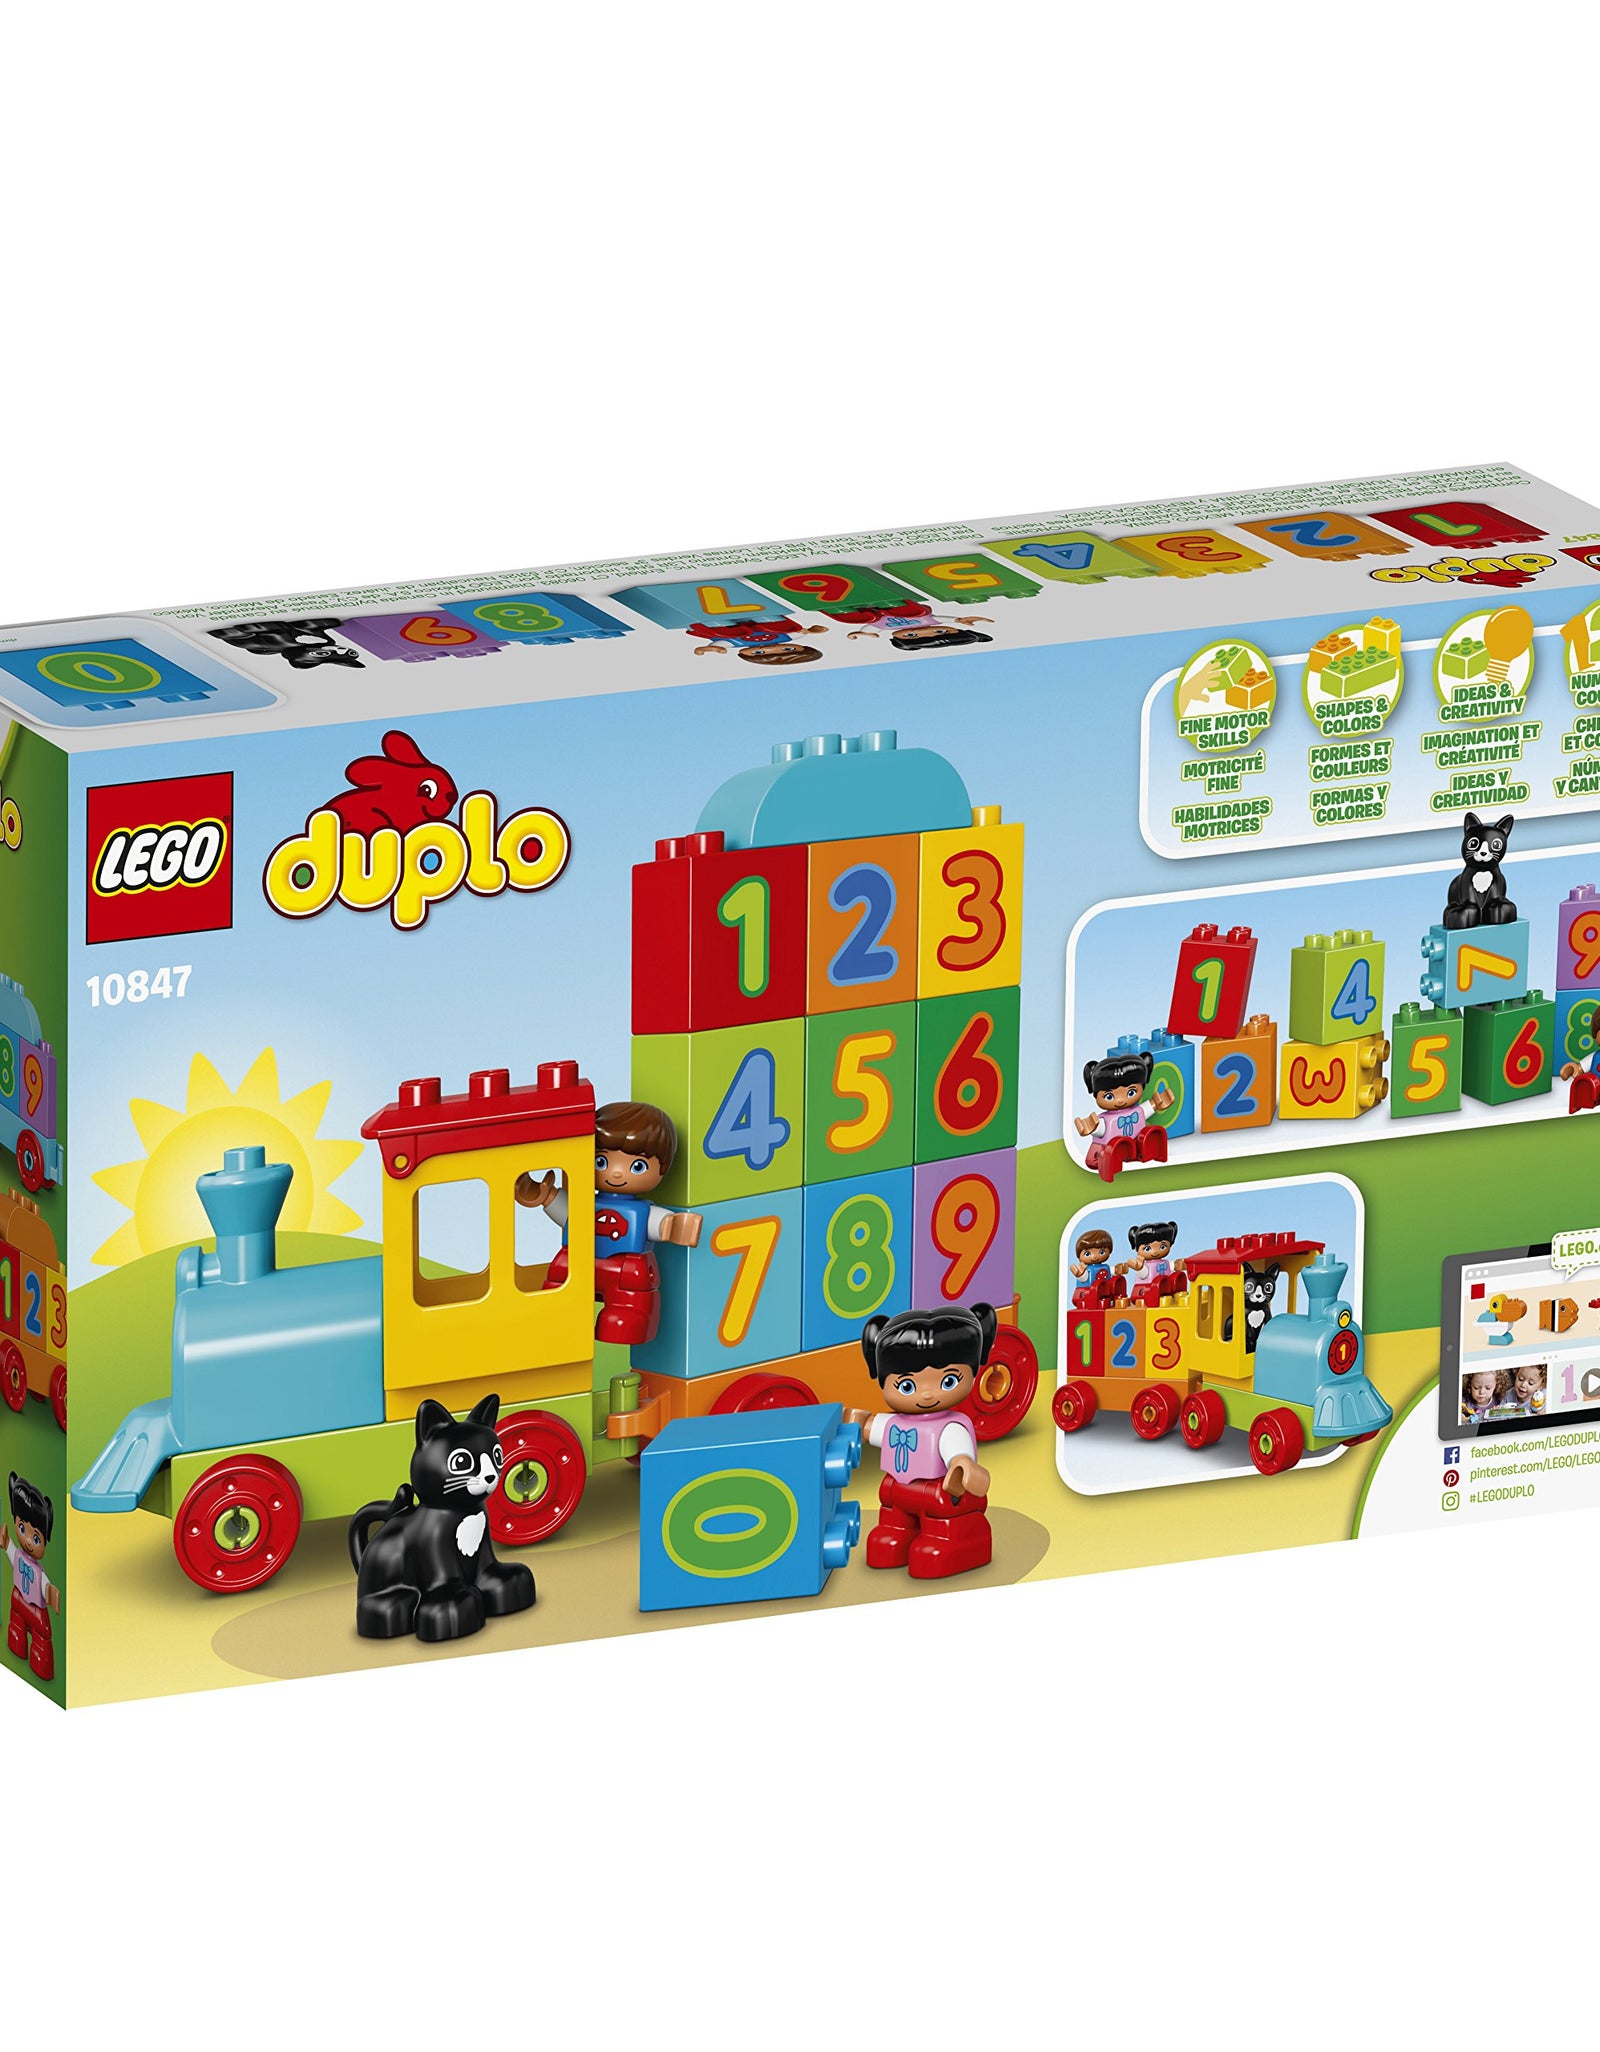 LEGO DUPLO My First Number Train 10847 Learning and Counting Train Set Building Kit and Educational Toy for 2-5 Year Olds (23 Pieces)